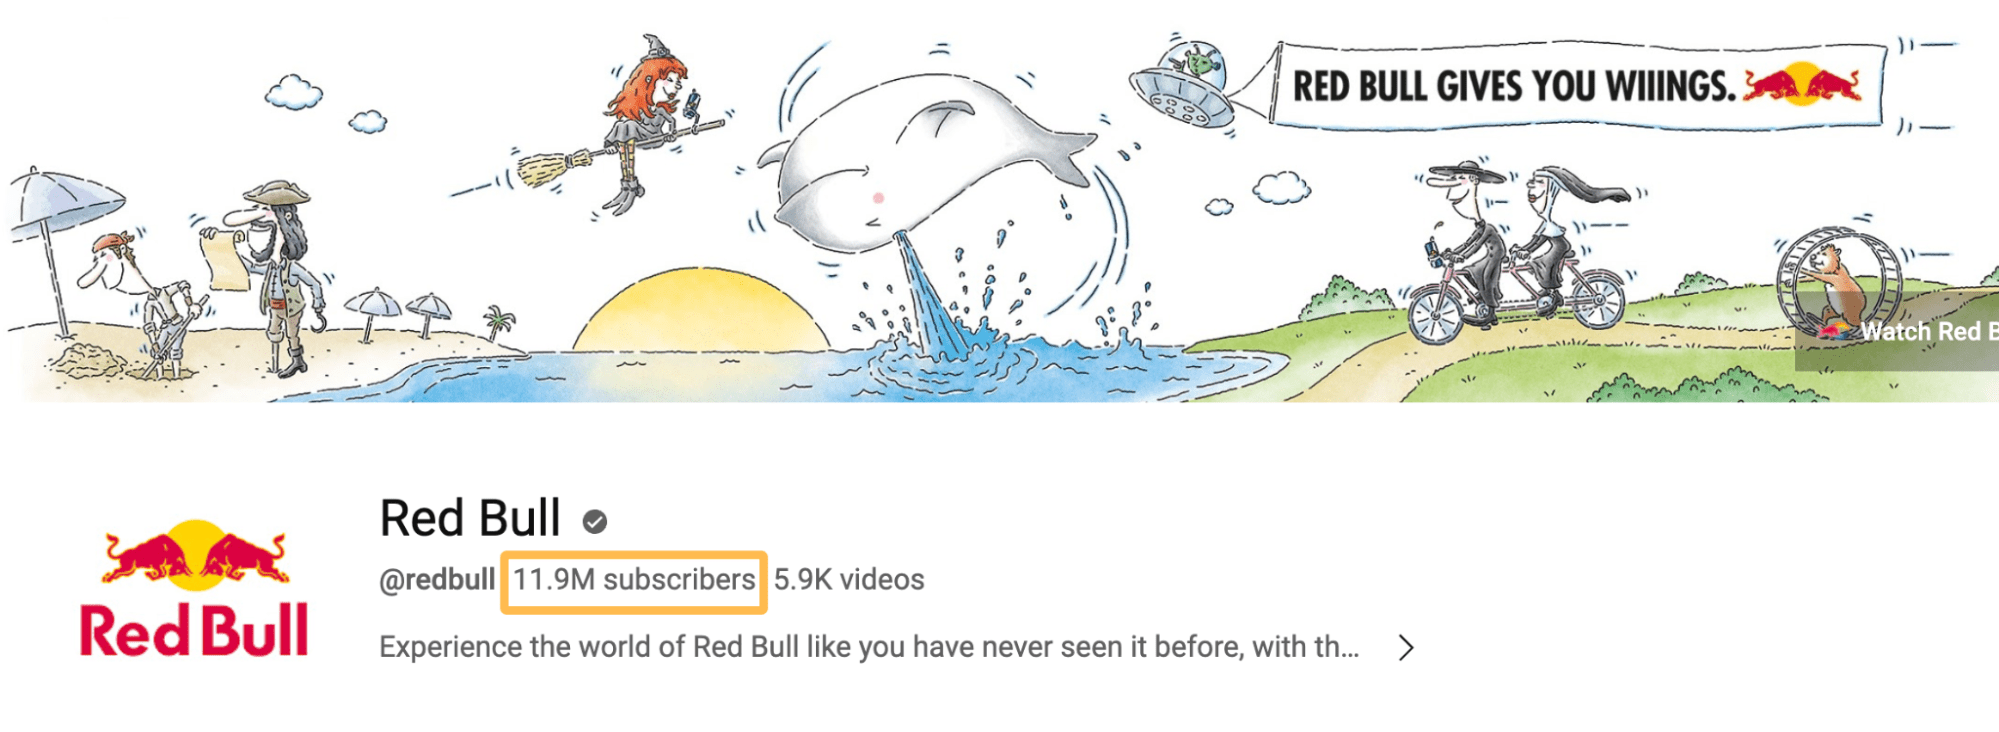 Subscriber count of almost 12M on Reb Bull's YouTube page